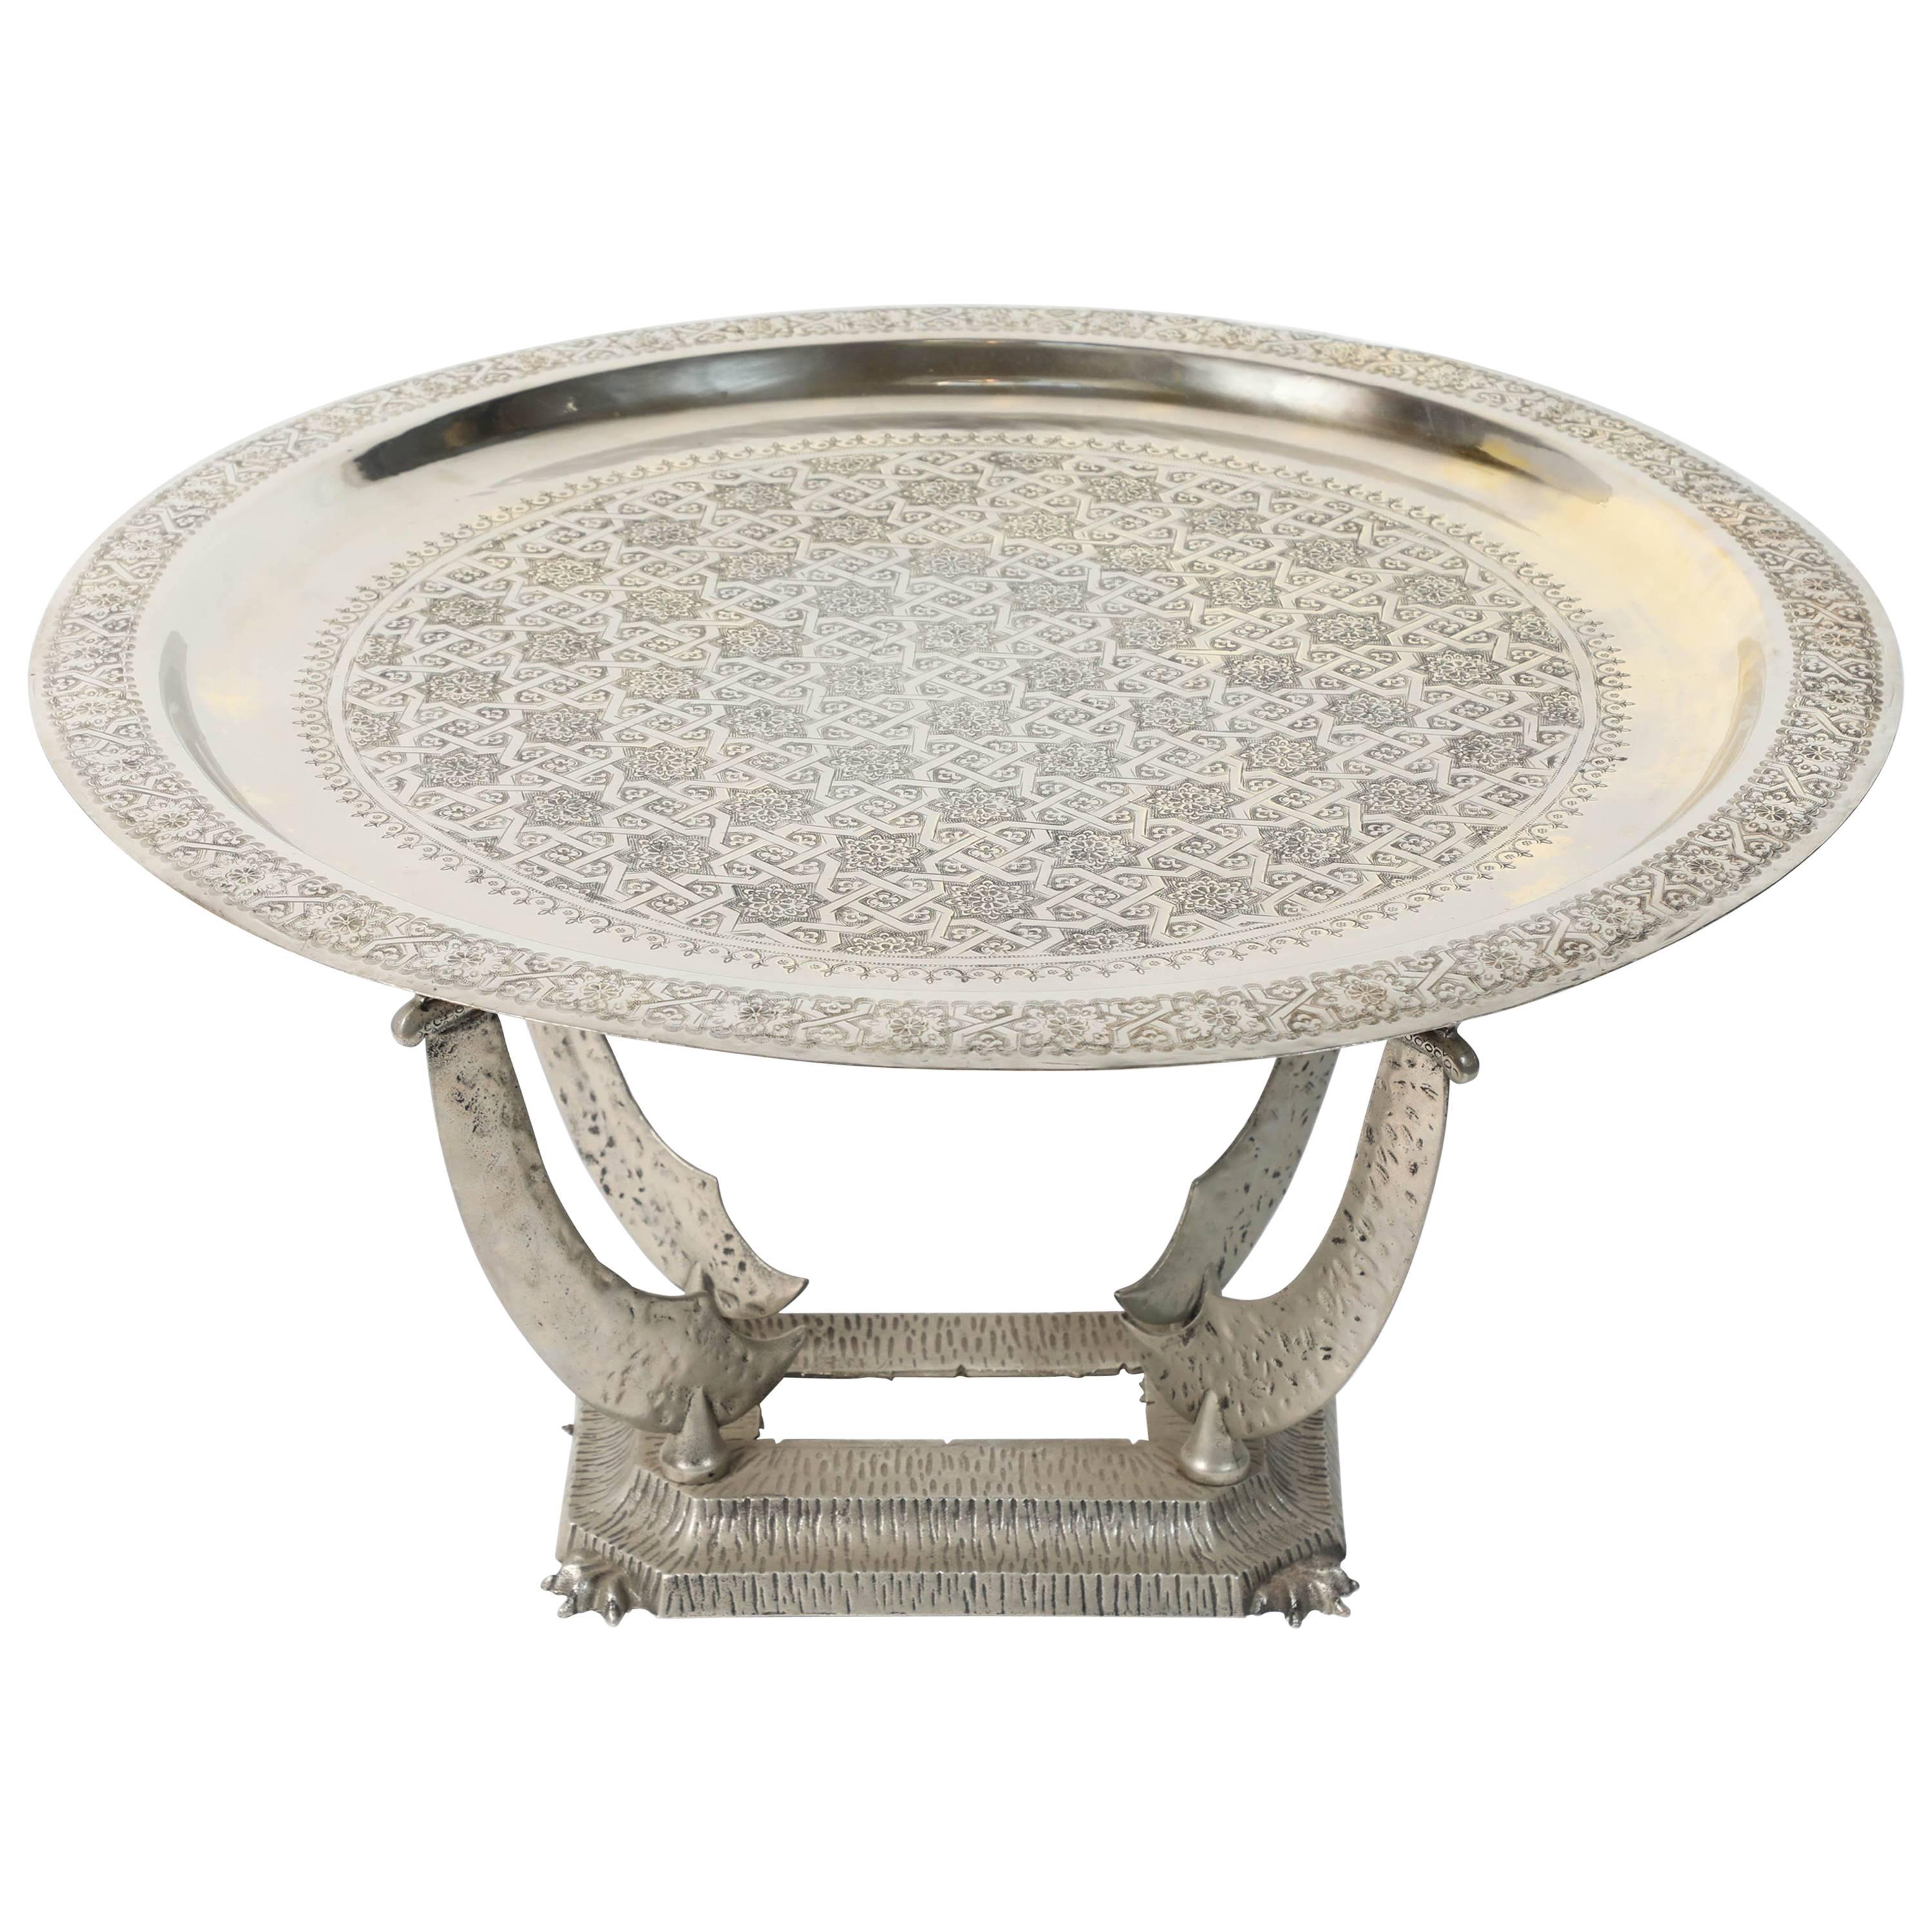 Moroccan Silvered Hand-Crafted Tray Table with Metal Stand